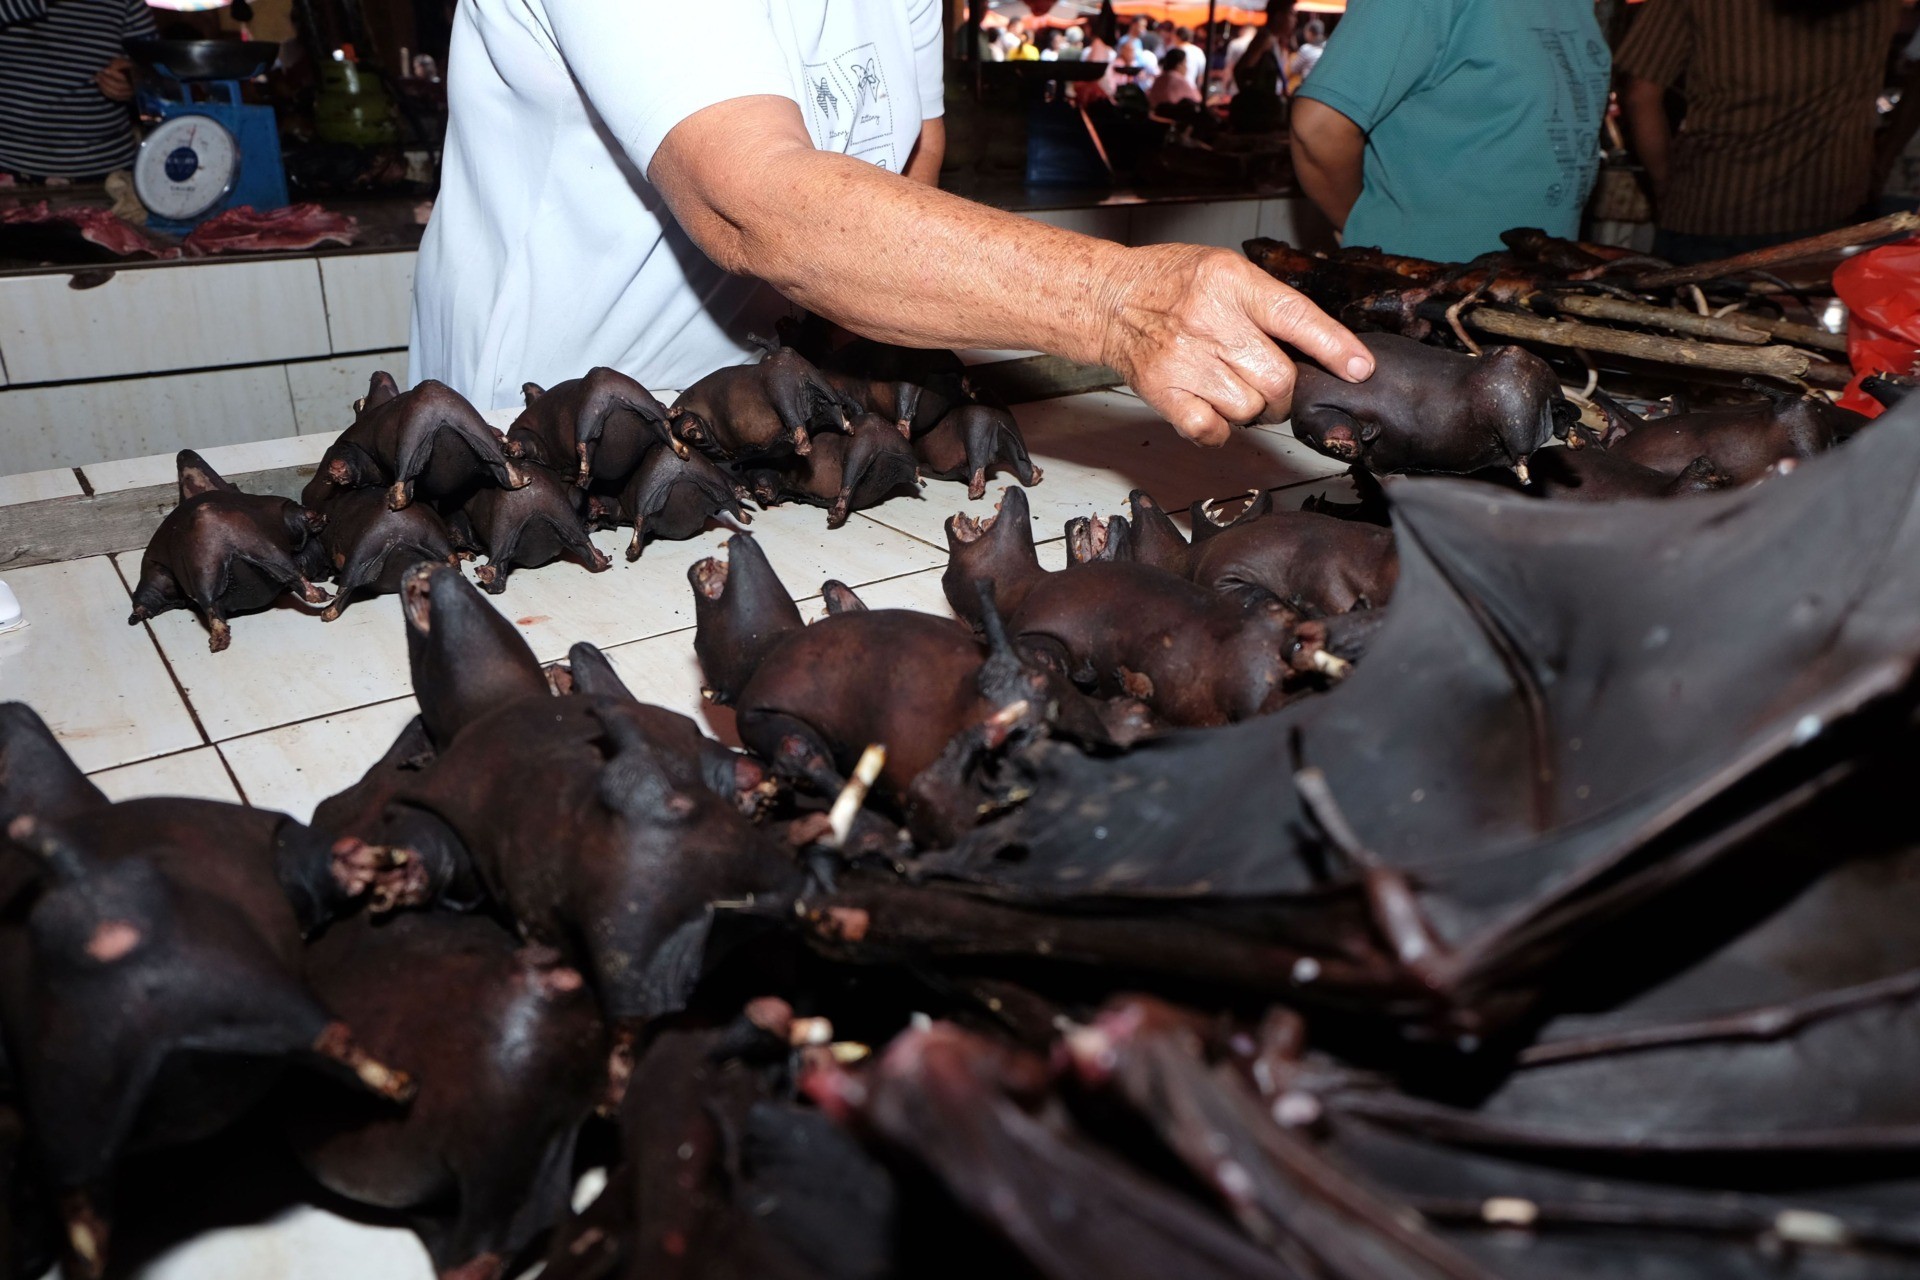 This photo taken on February 8, 2020 shows a vendor selling bats at the Tomohon Extreme Meat market on Sulawesi island, as business is booming and curious tourists keep arriving to check out exotic fare that enrages animal rights activists. - Bats, rats and snakes are still being sold at an Indonesian market known for its 'extreme' wildlife offerings, despite calls to take them off the menu over fears of COVID-19 coronavirus link. (Photo by Ronny Adolof Buol / AFP) (Photo by RONNY ADOLOF BUOL/AFP via Getty Images)